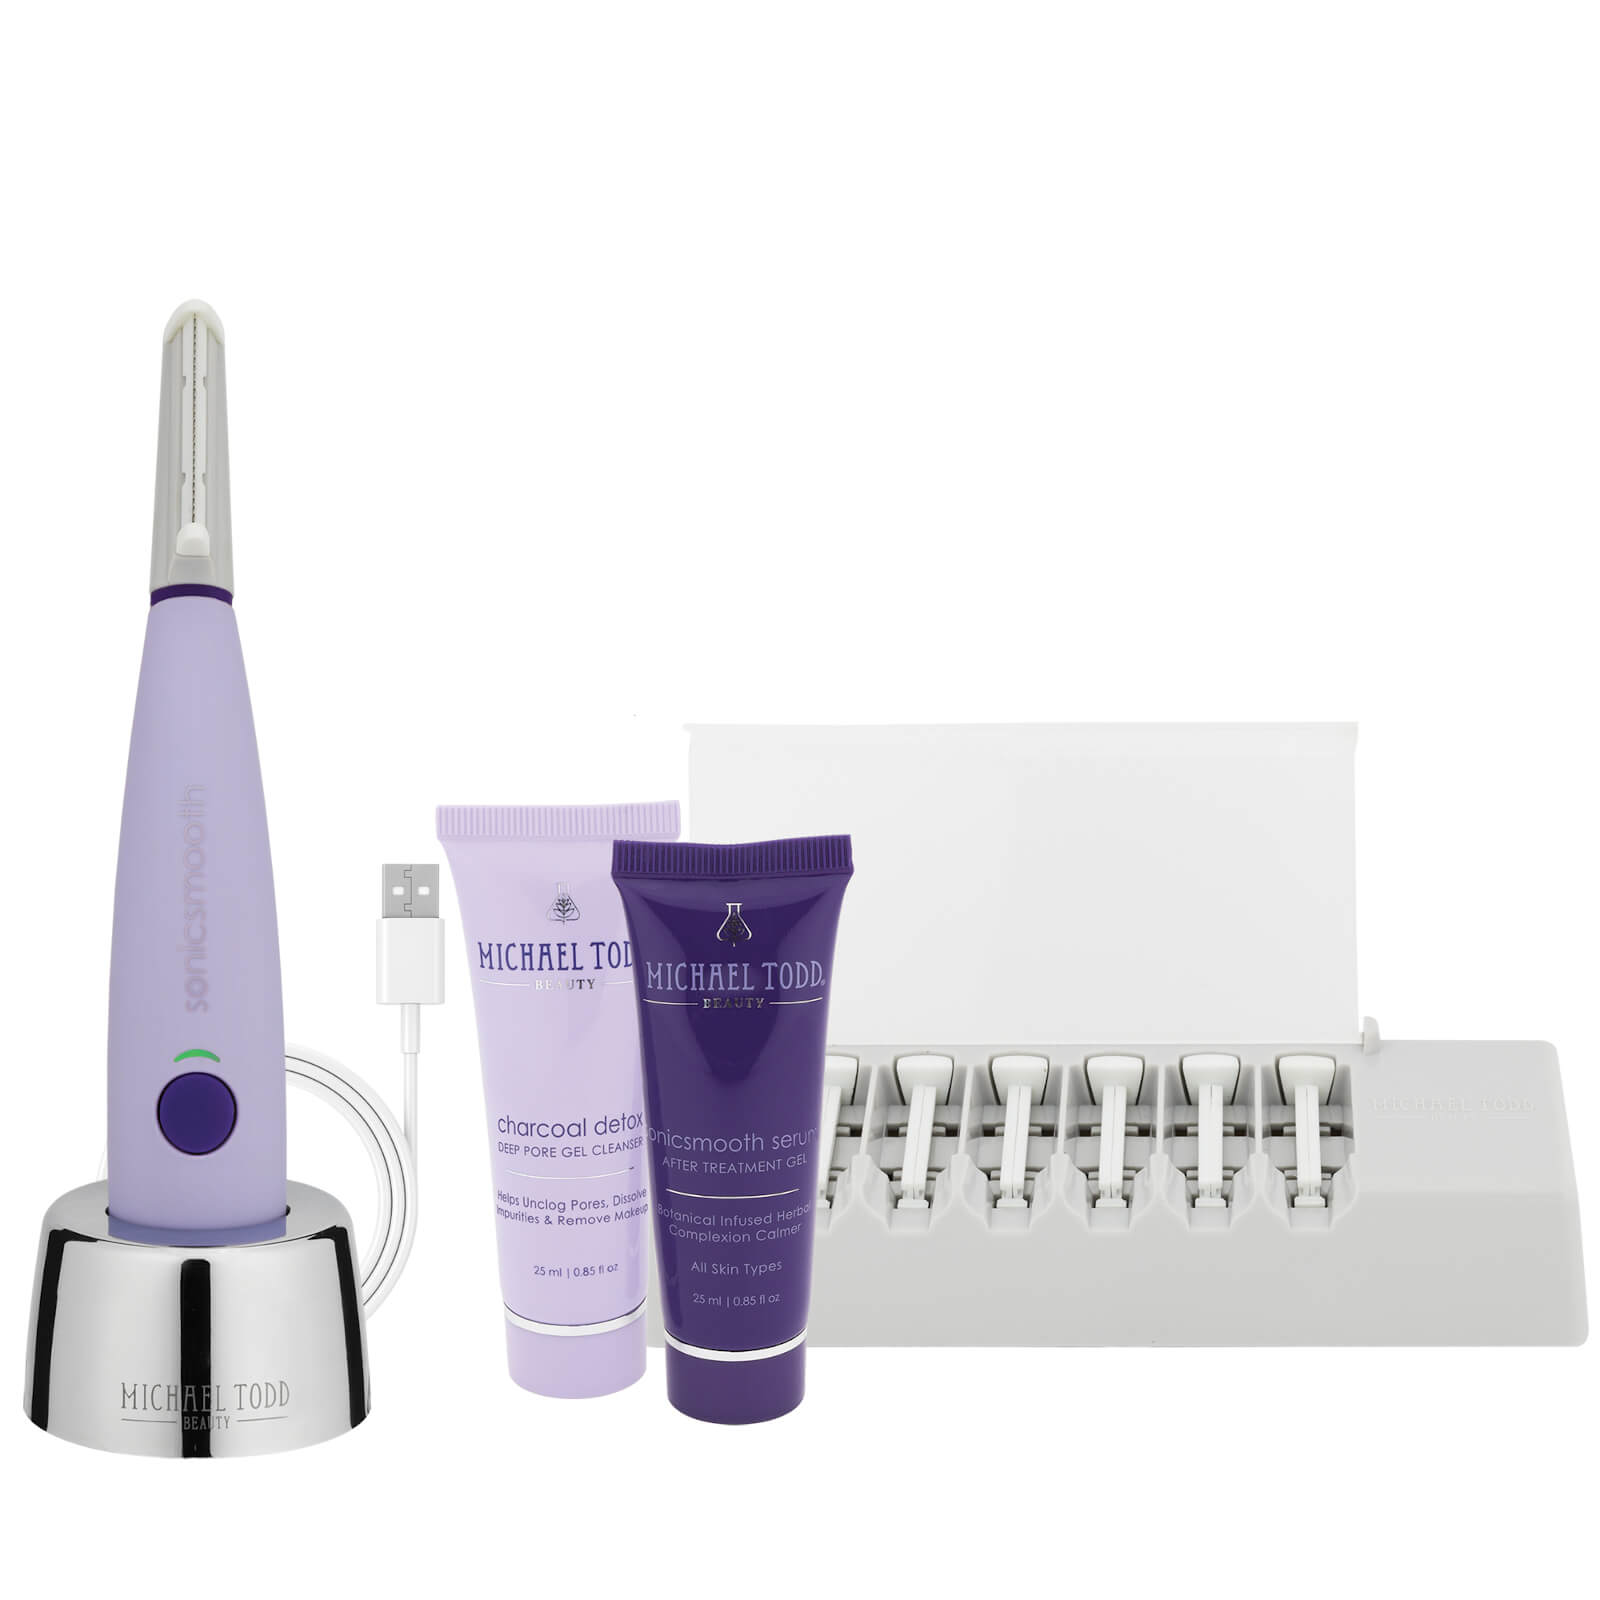 Michael Todd Beauty Sonicsmooth Sonic Dermaplaning And Exfoliation System (various Shades) In Lavender